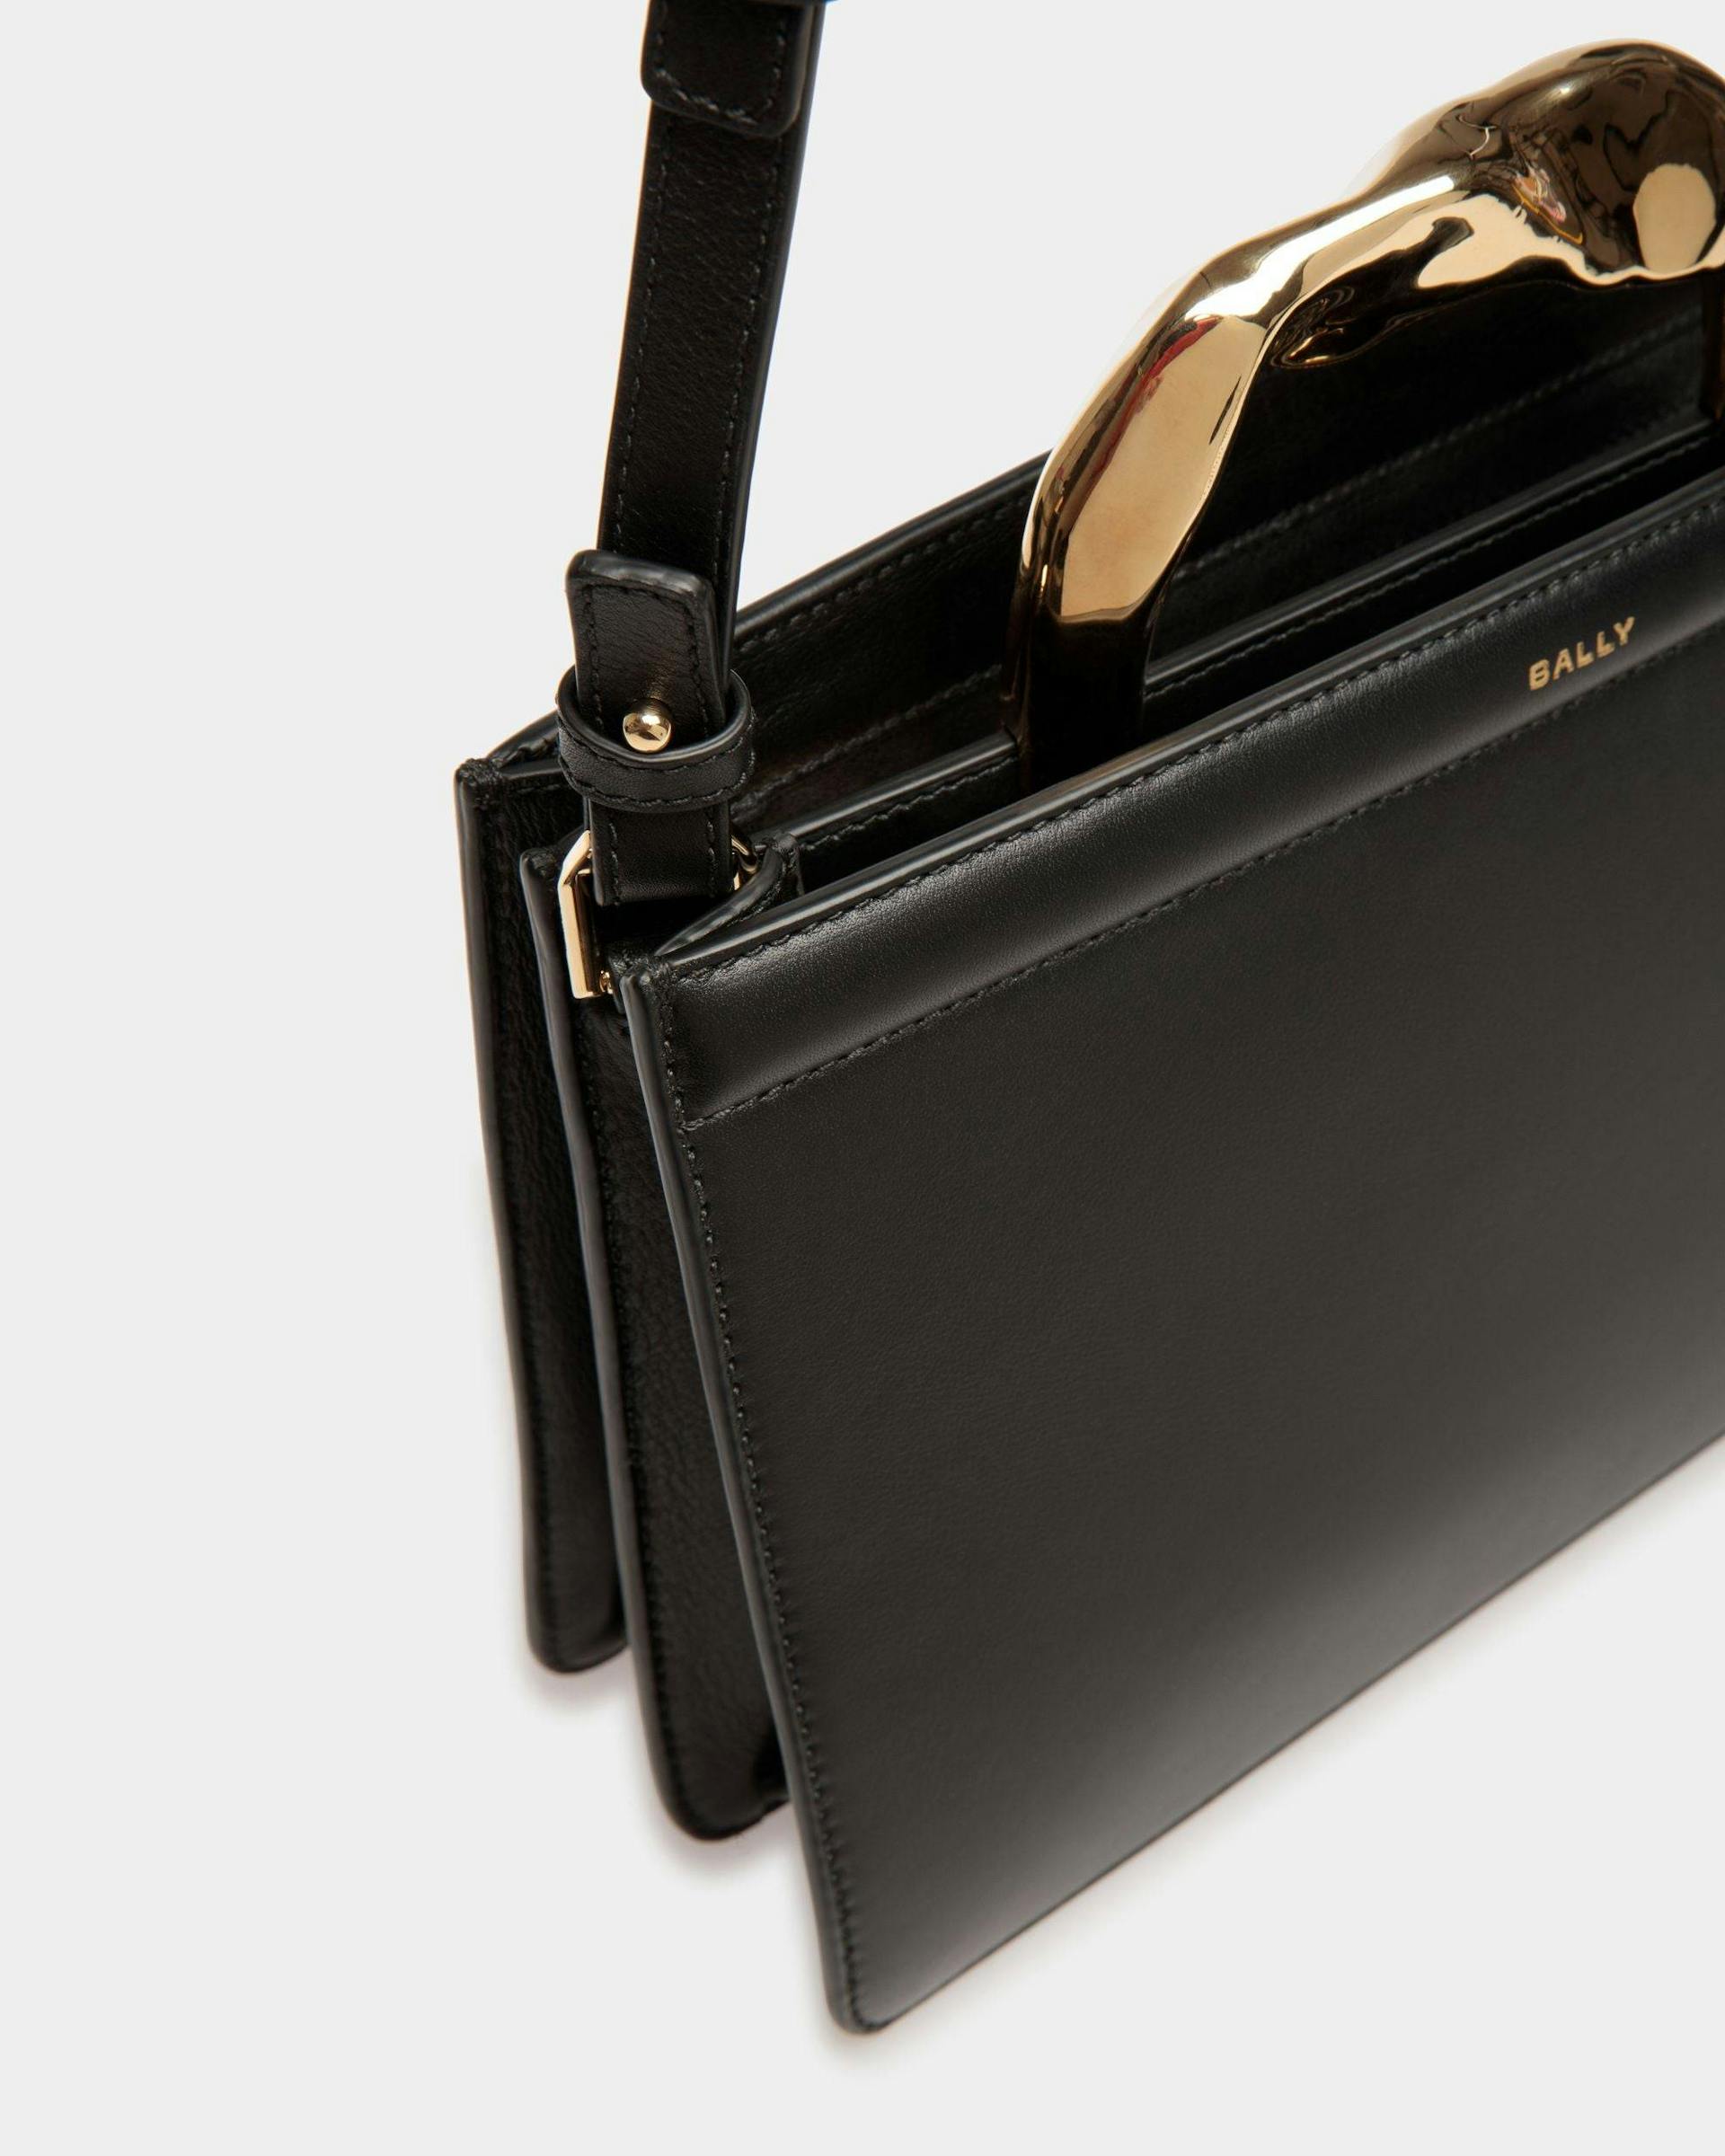 Women's Baroque Top Handle Bag In Black Leather | Bally | Still Life Detail